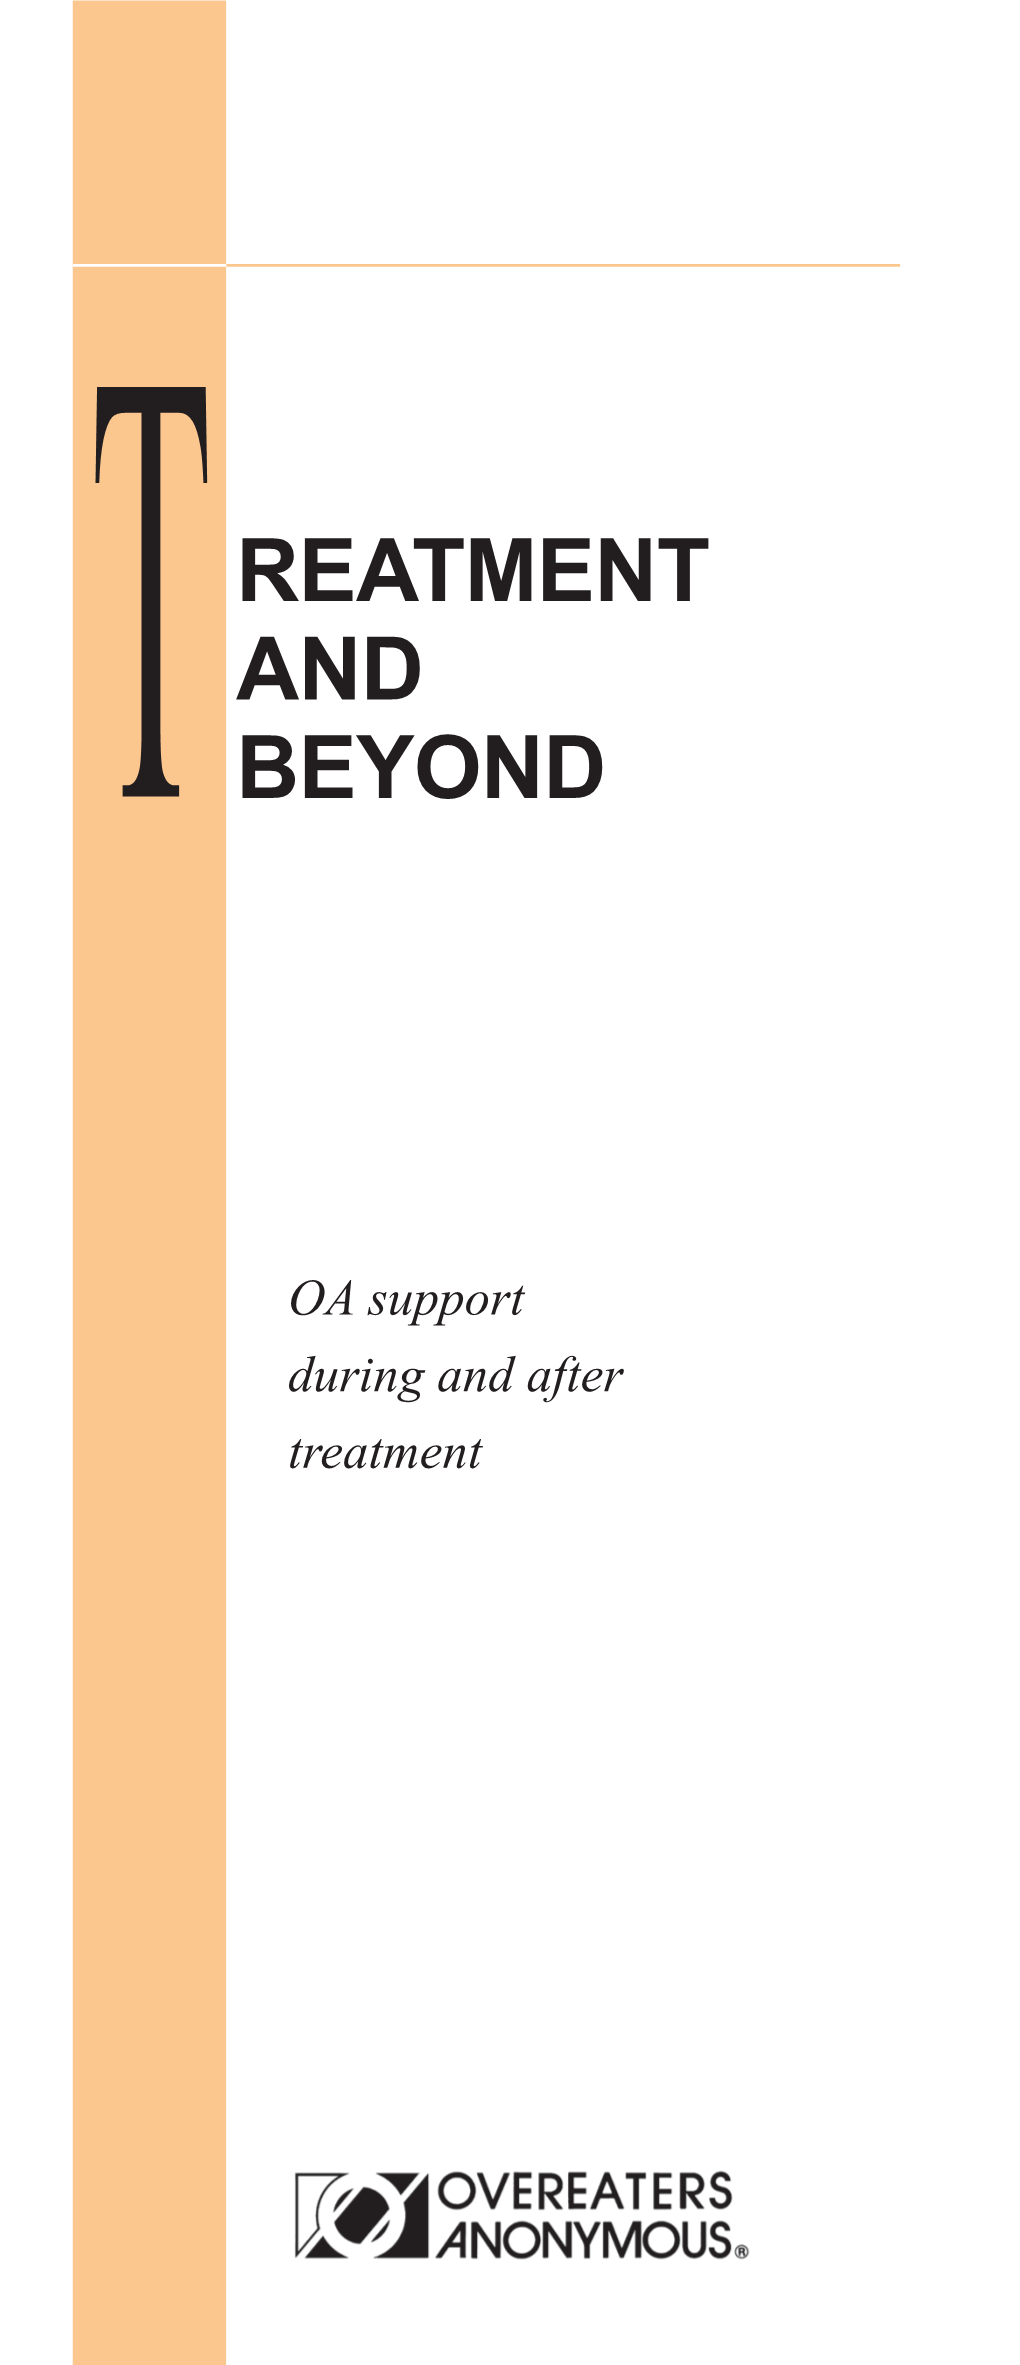 Treatment and Beyond